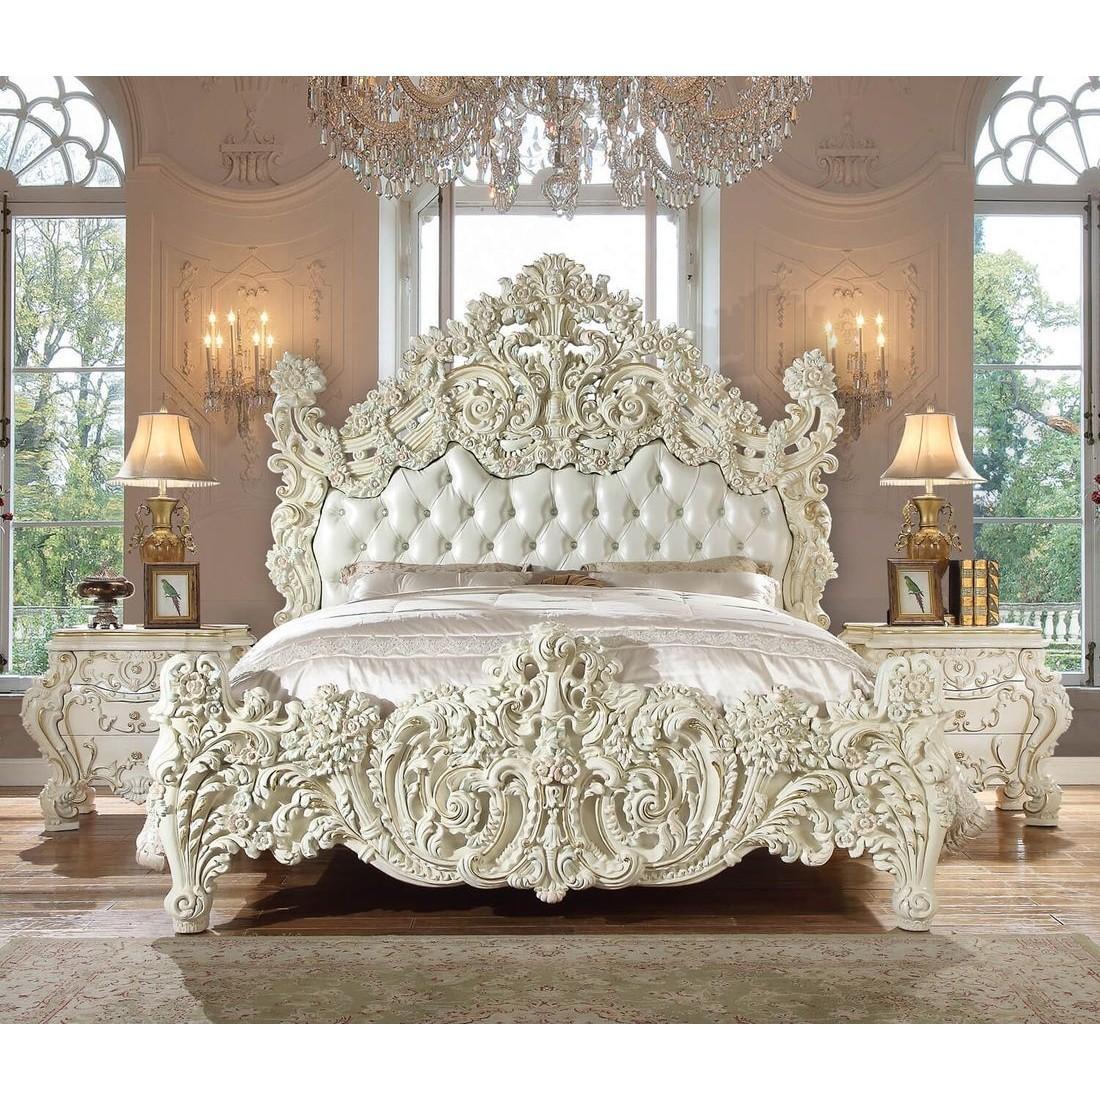 Traditional Sleigh Bedroom Set HD-8089 HD-EK8089-3PC in White, Gold Faux Leather